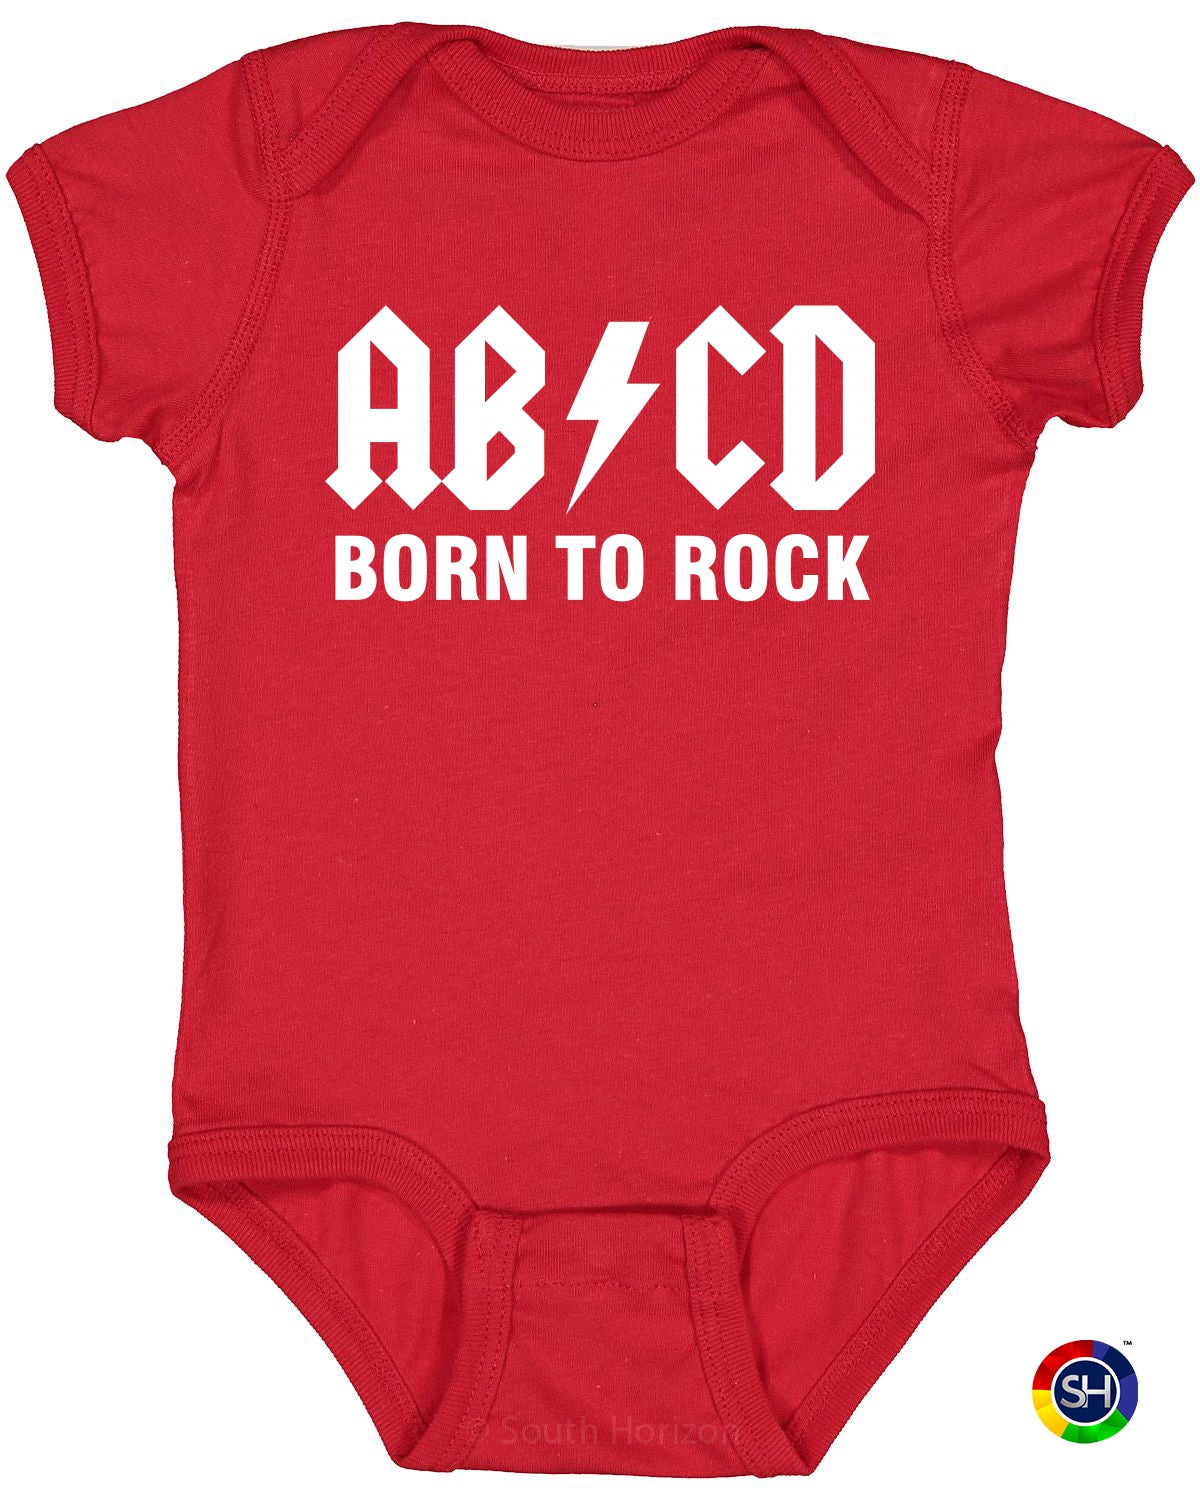 ABCD Born To Rock on Infant BodySuit (#1233-10)